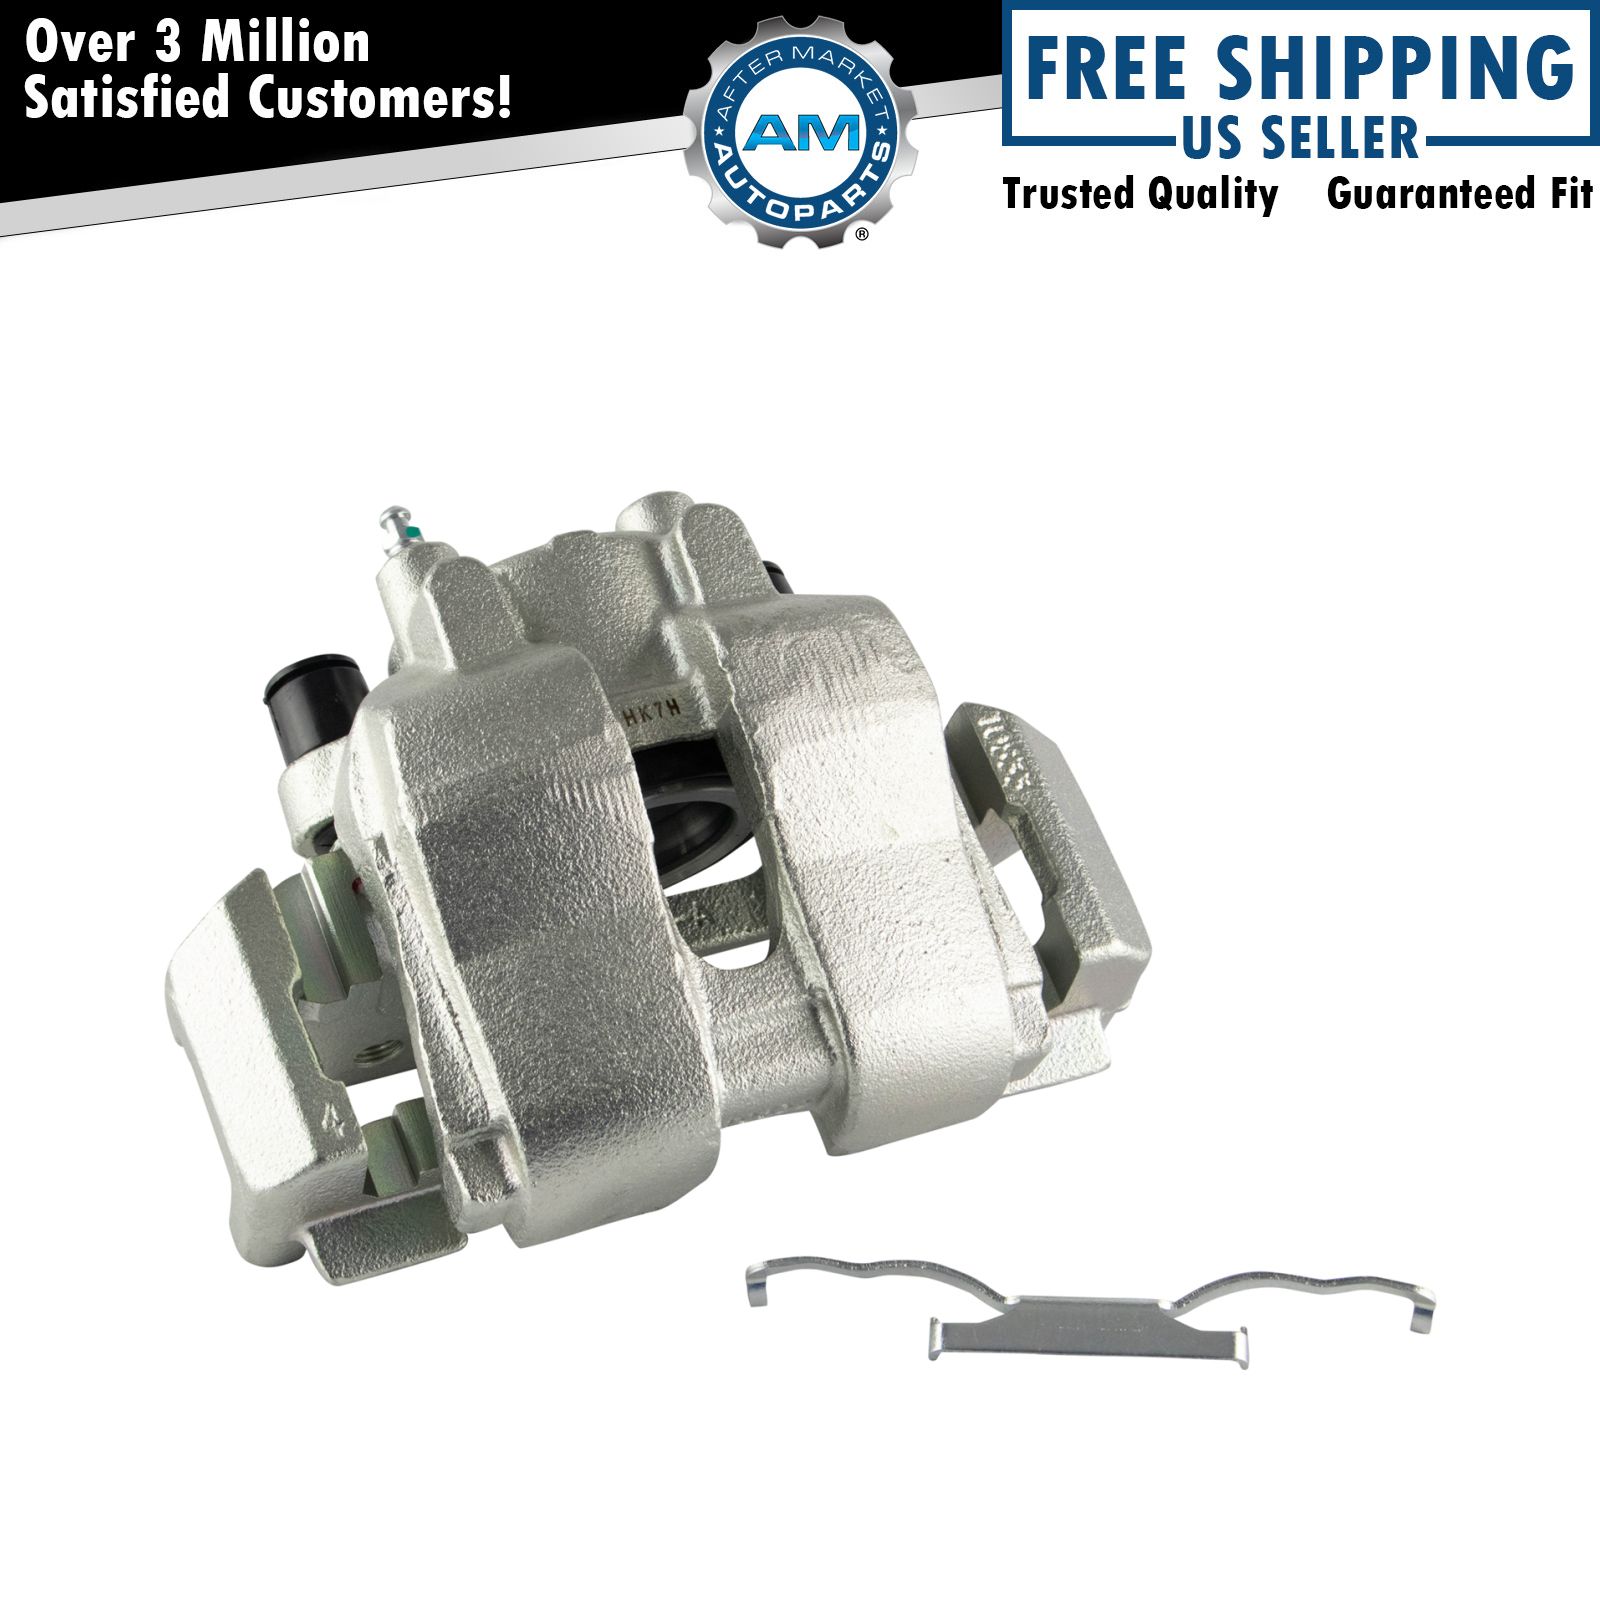 NEW Right Front Disc Brake Caliper for Ford Escape Tribute Mariner